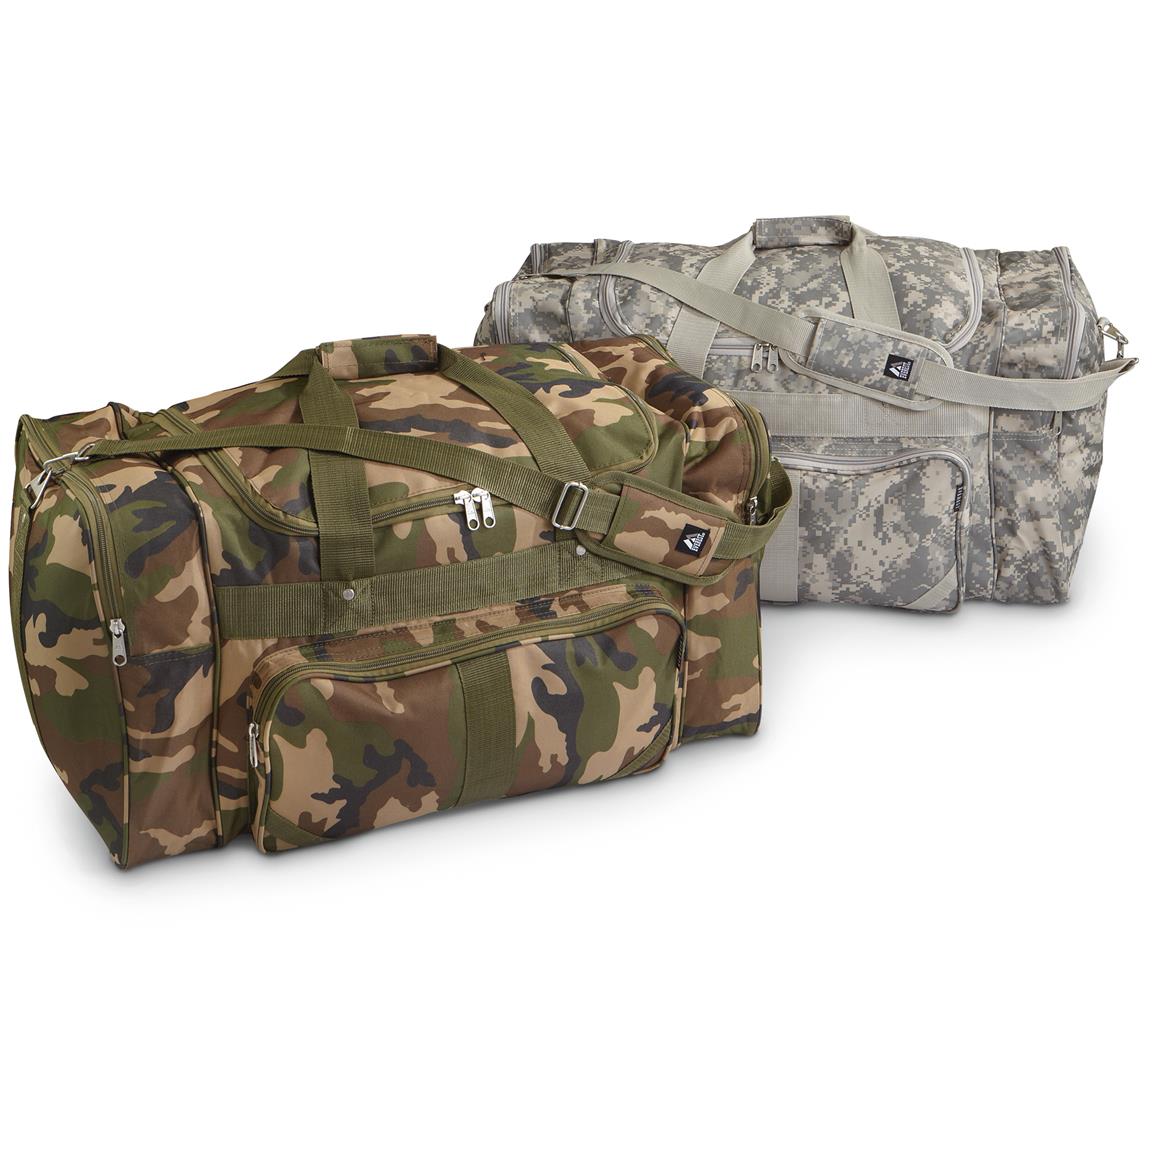 Military-style 4-compartment Camo Duffel Bag - 640719, Duffle Bags at Sportsman&#39;s Guide